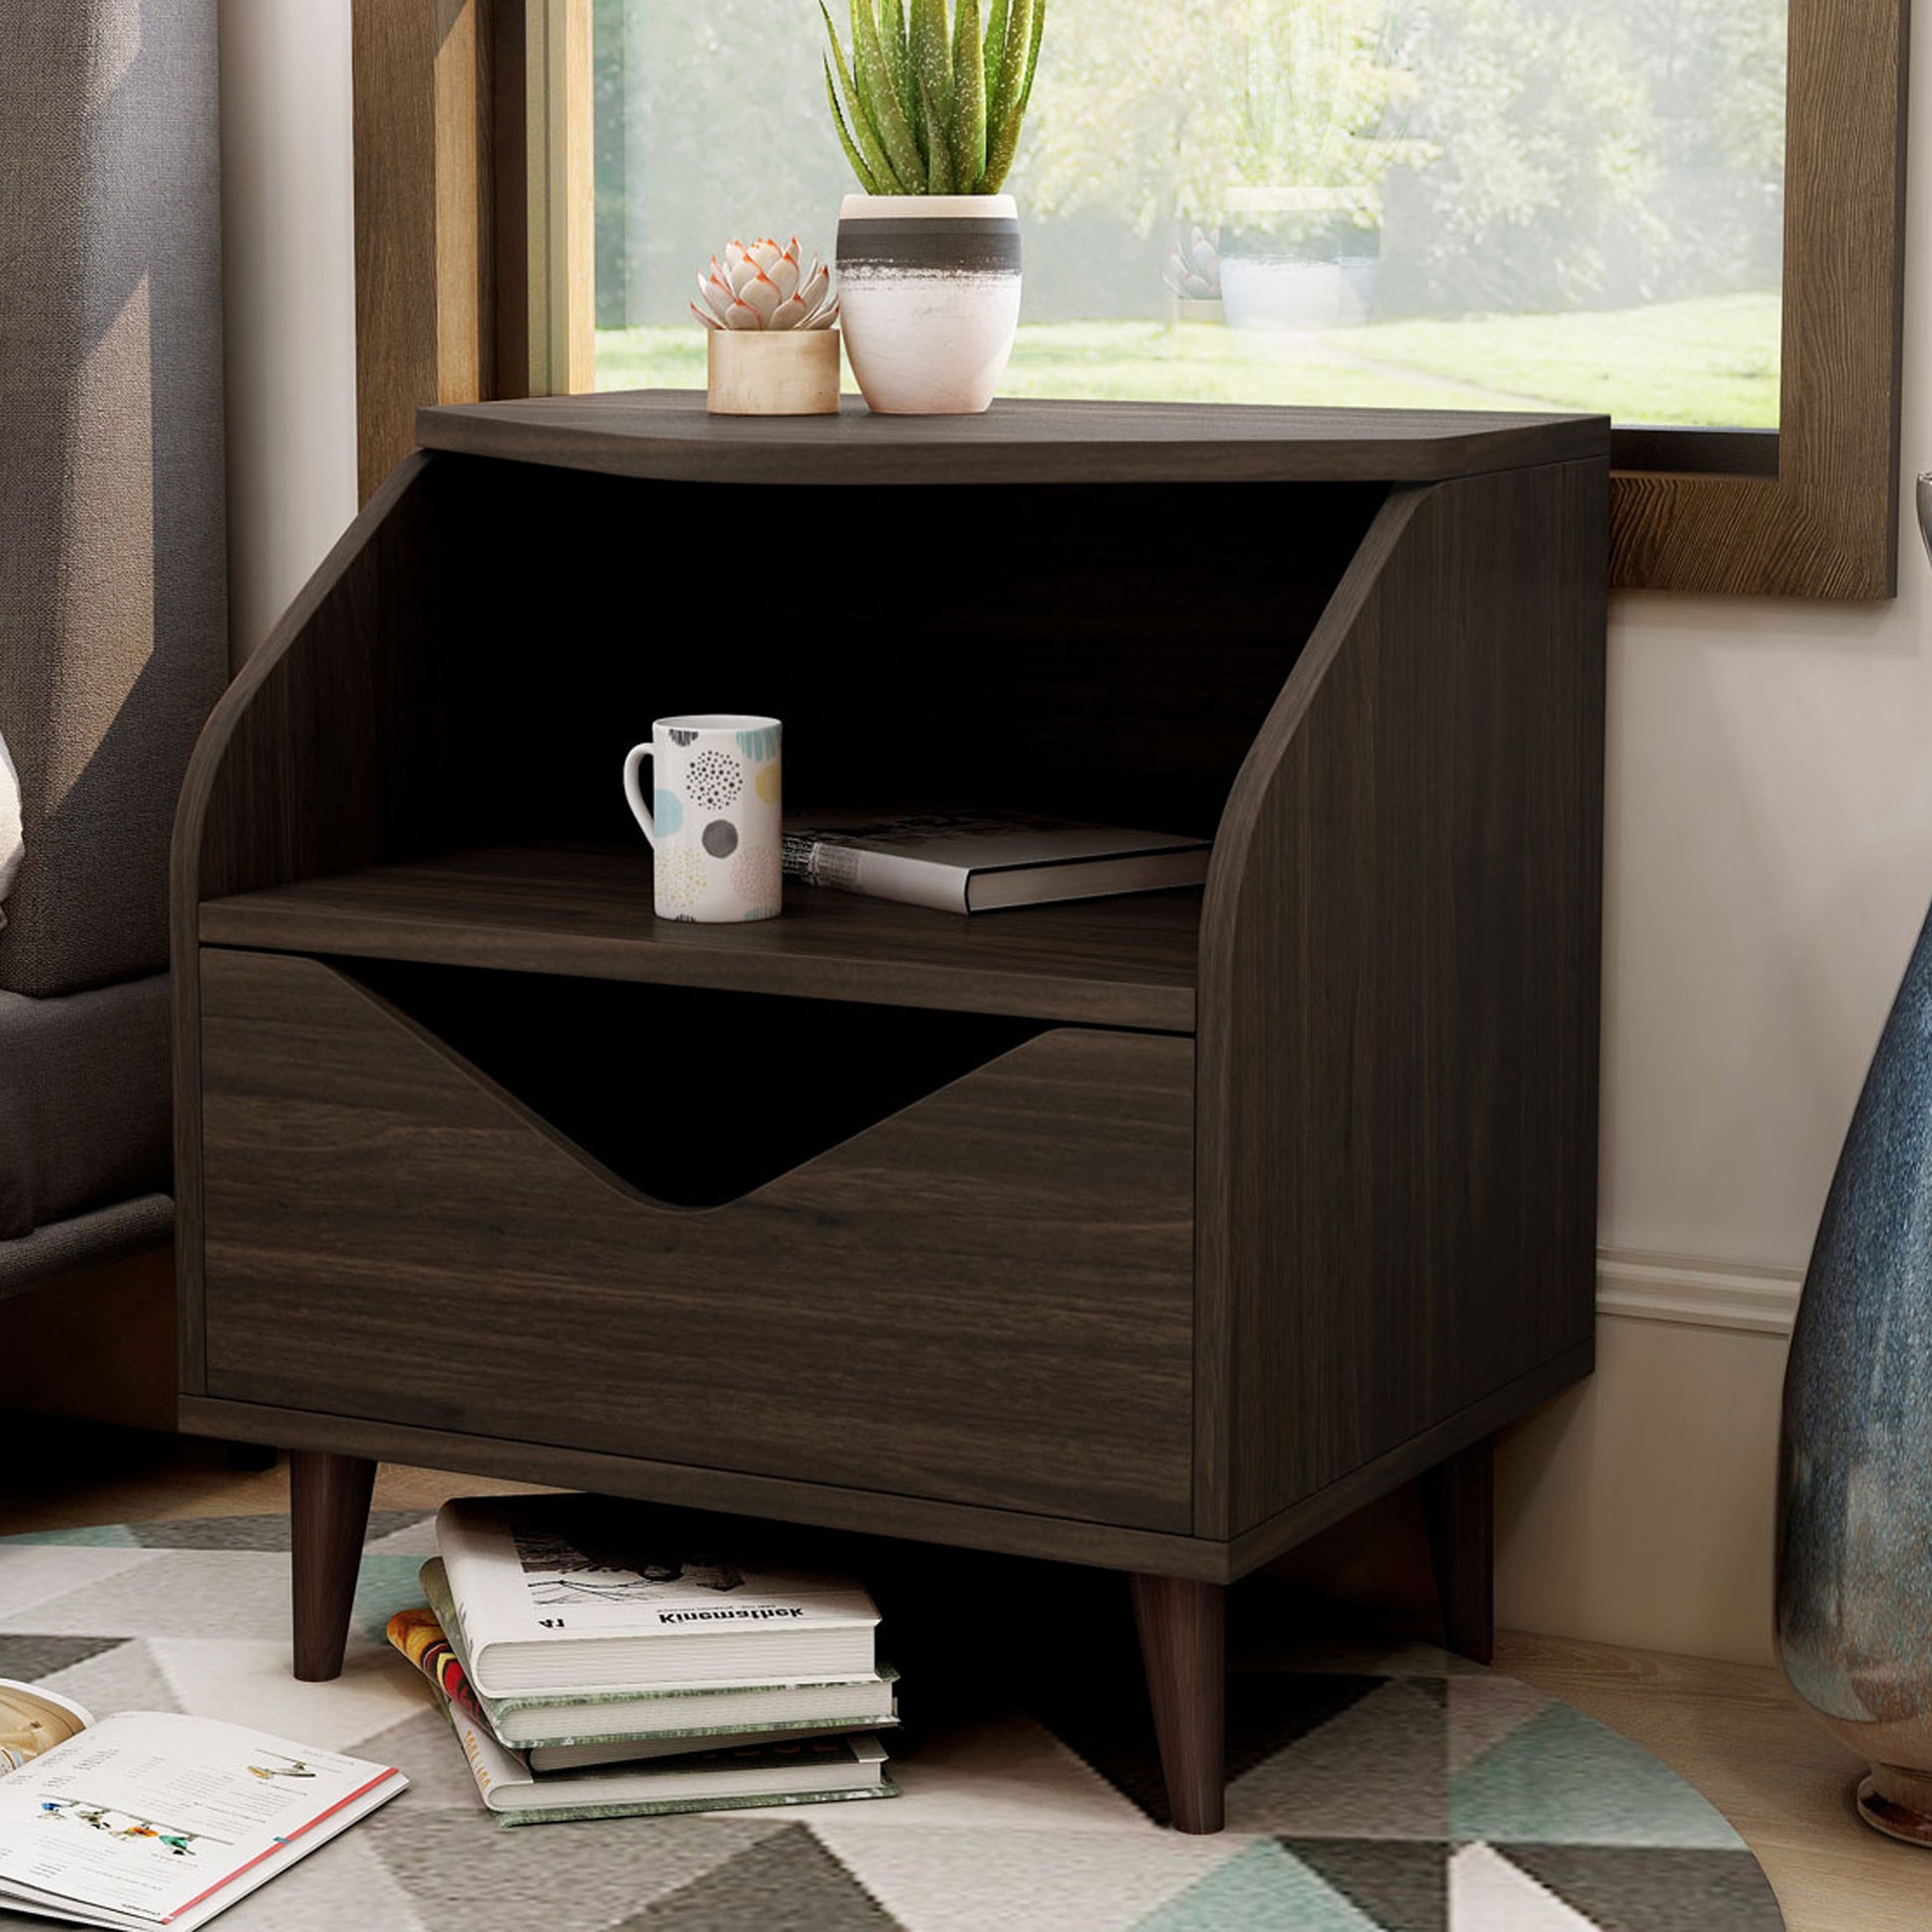 Left angled mid-century modern wenge one-drawer end table in a living rea with accessories